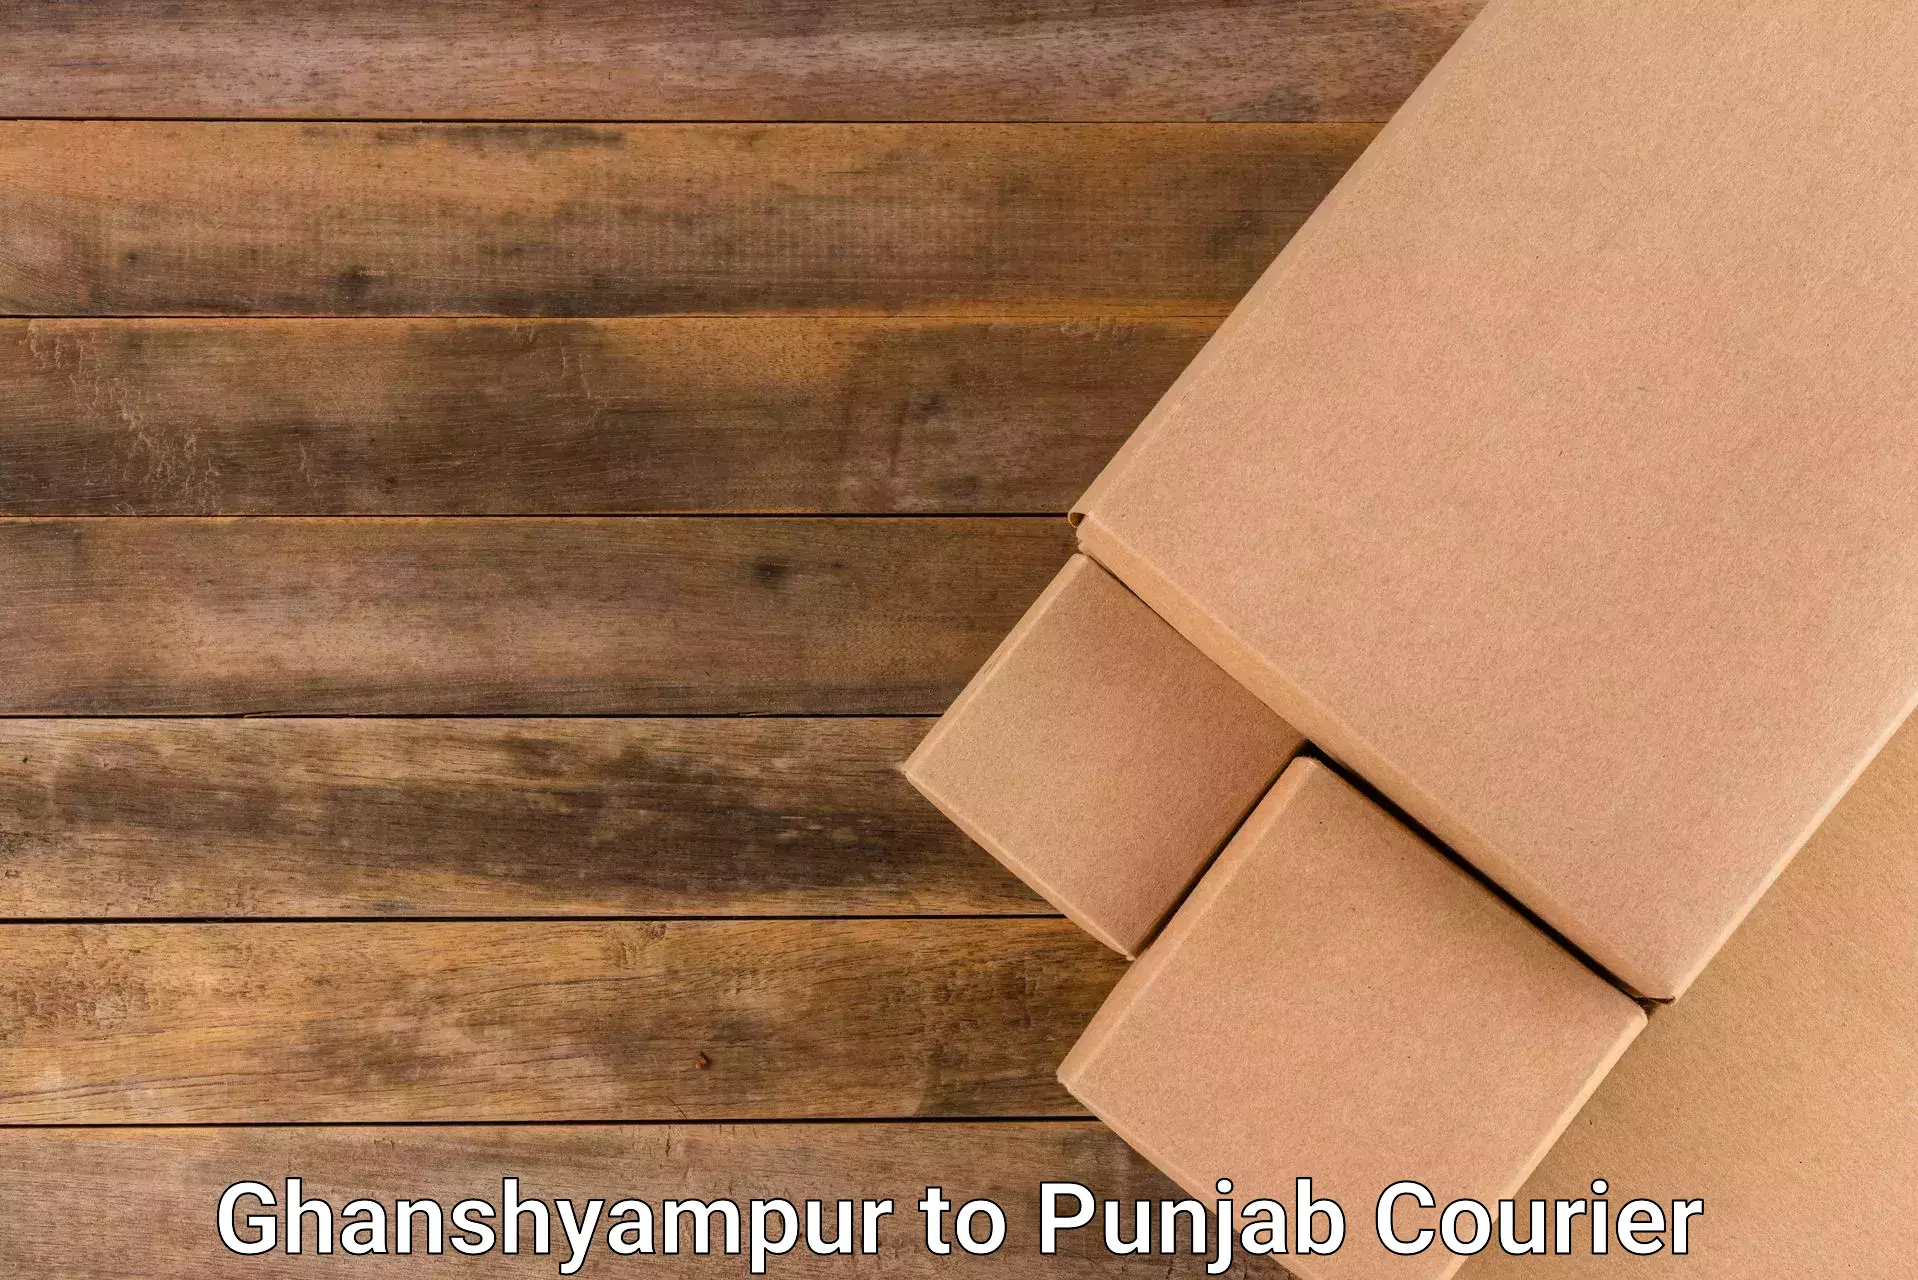 Subscription-based courier Ghanshyampur to Amritsar